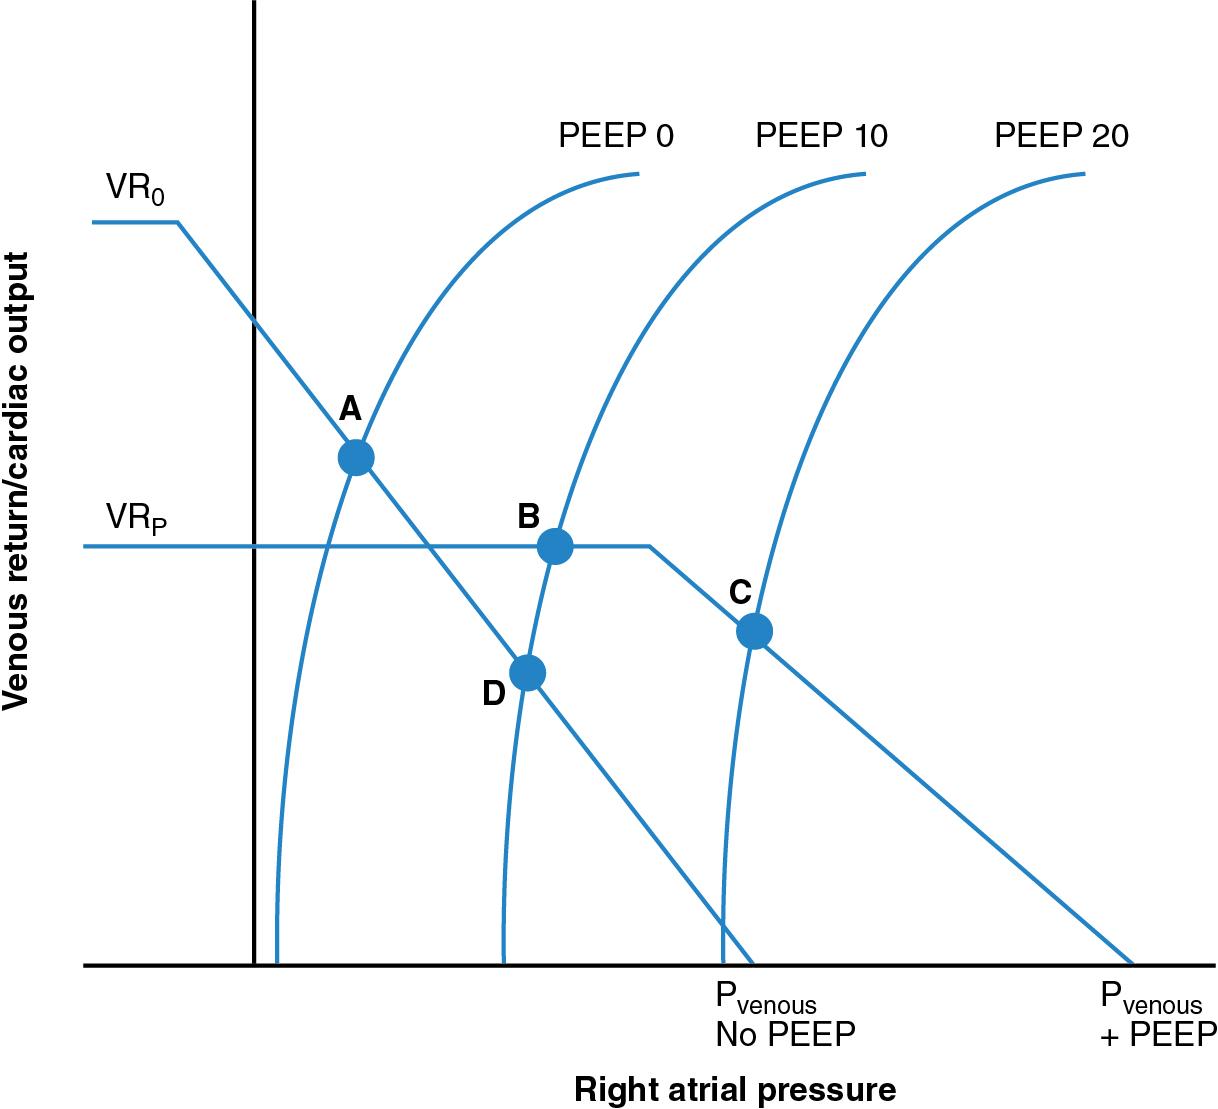 Fig. 4.2, Relationship between cardiac function and venous return curves illustrating the hemodynamic effects of positive end-expiratory pressure (PEEP).